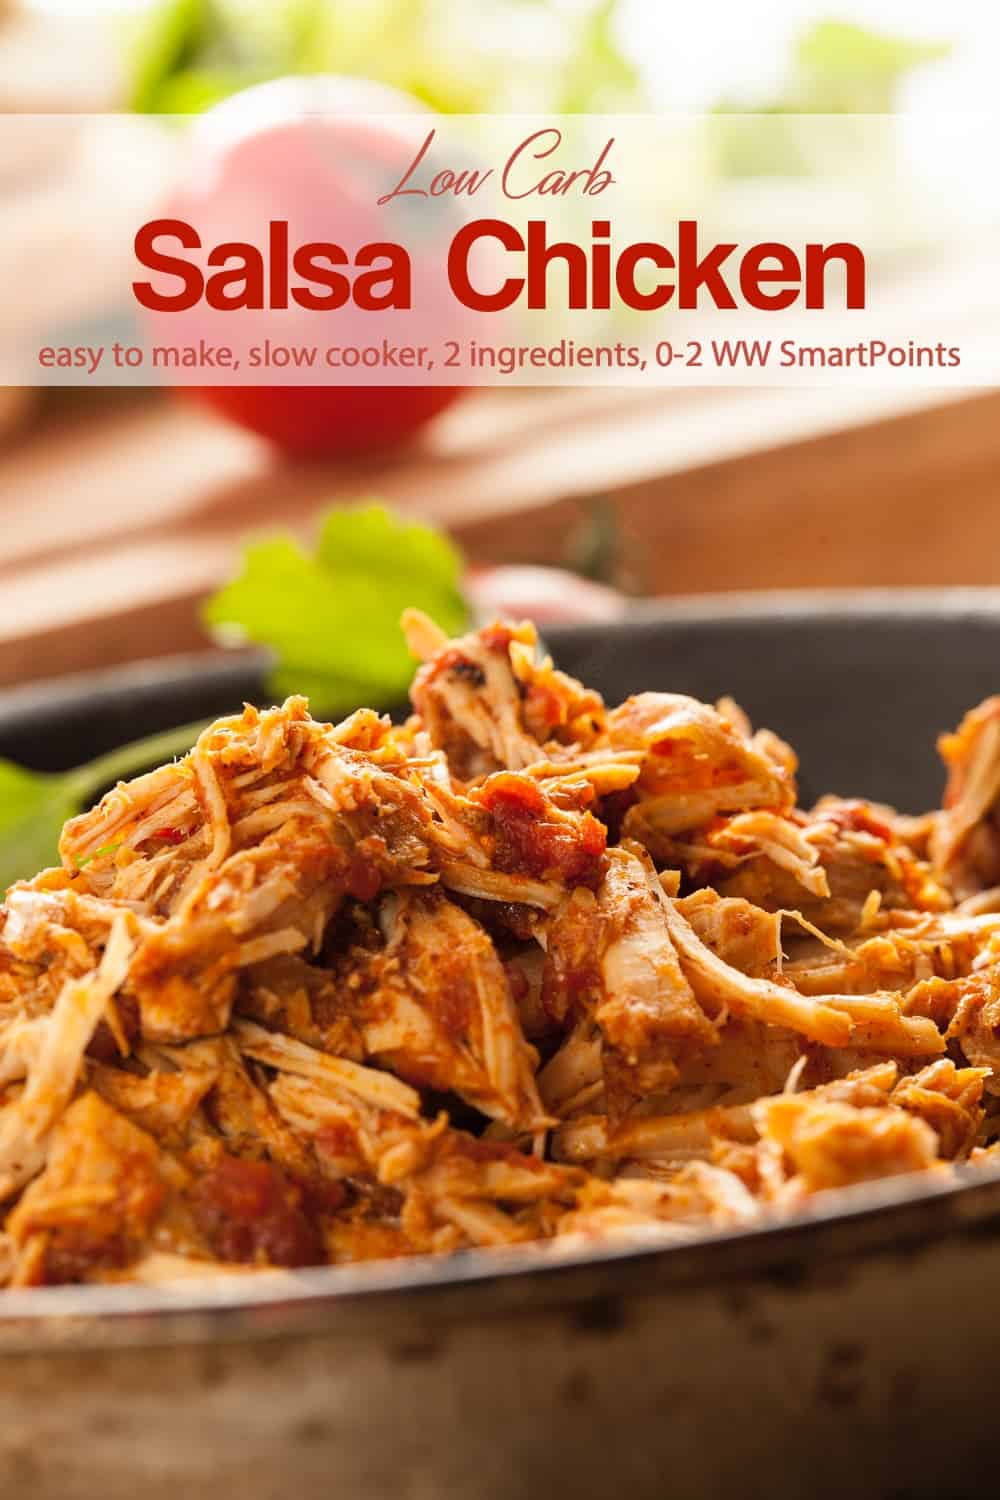 Pan with Shredded Salsa Chicken